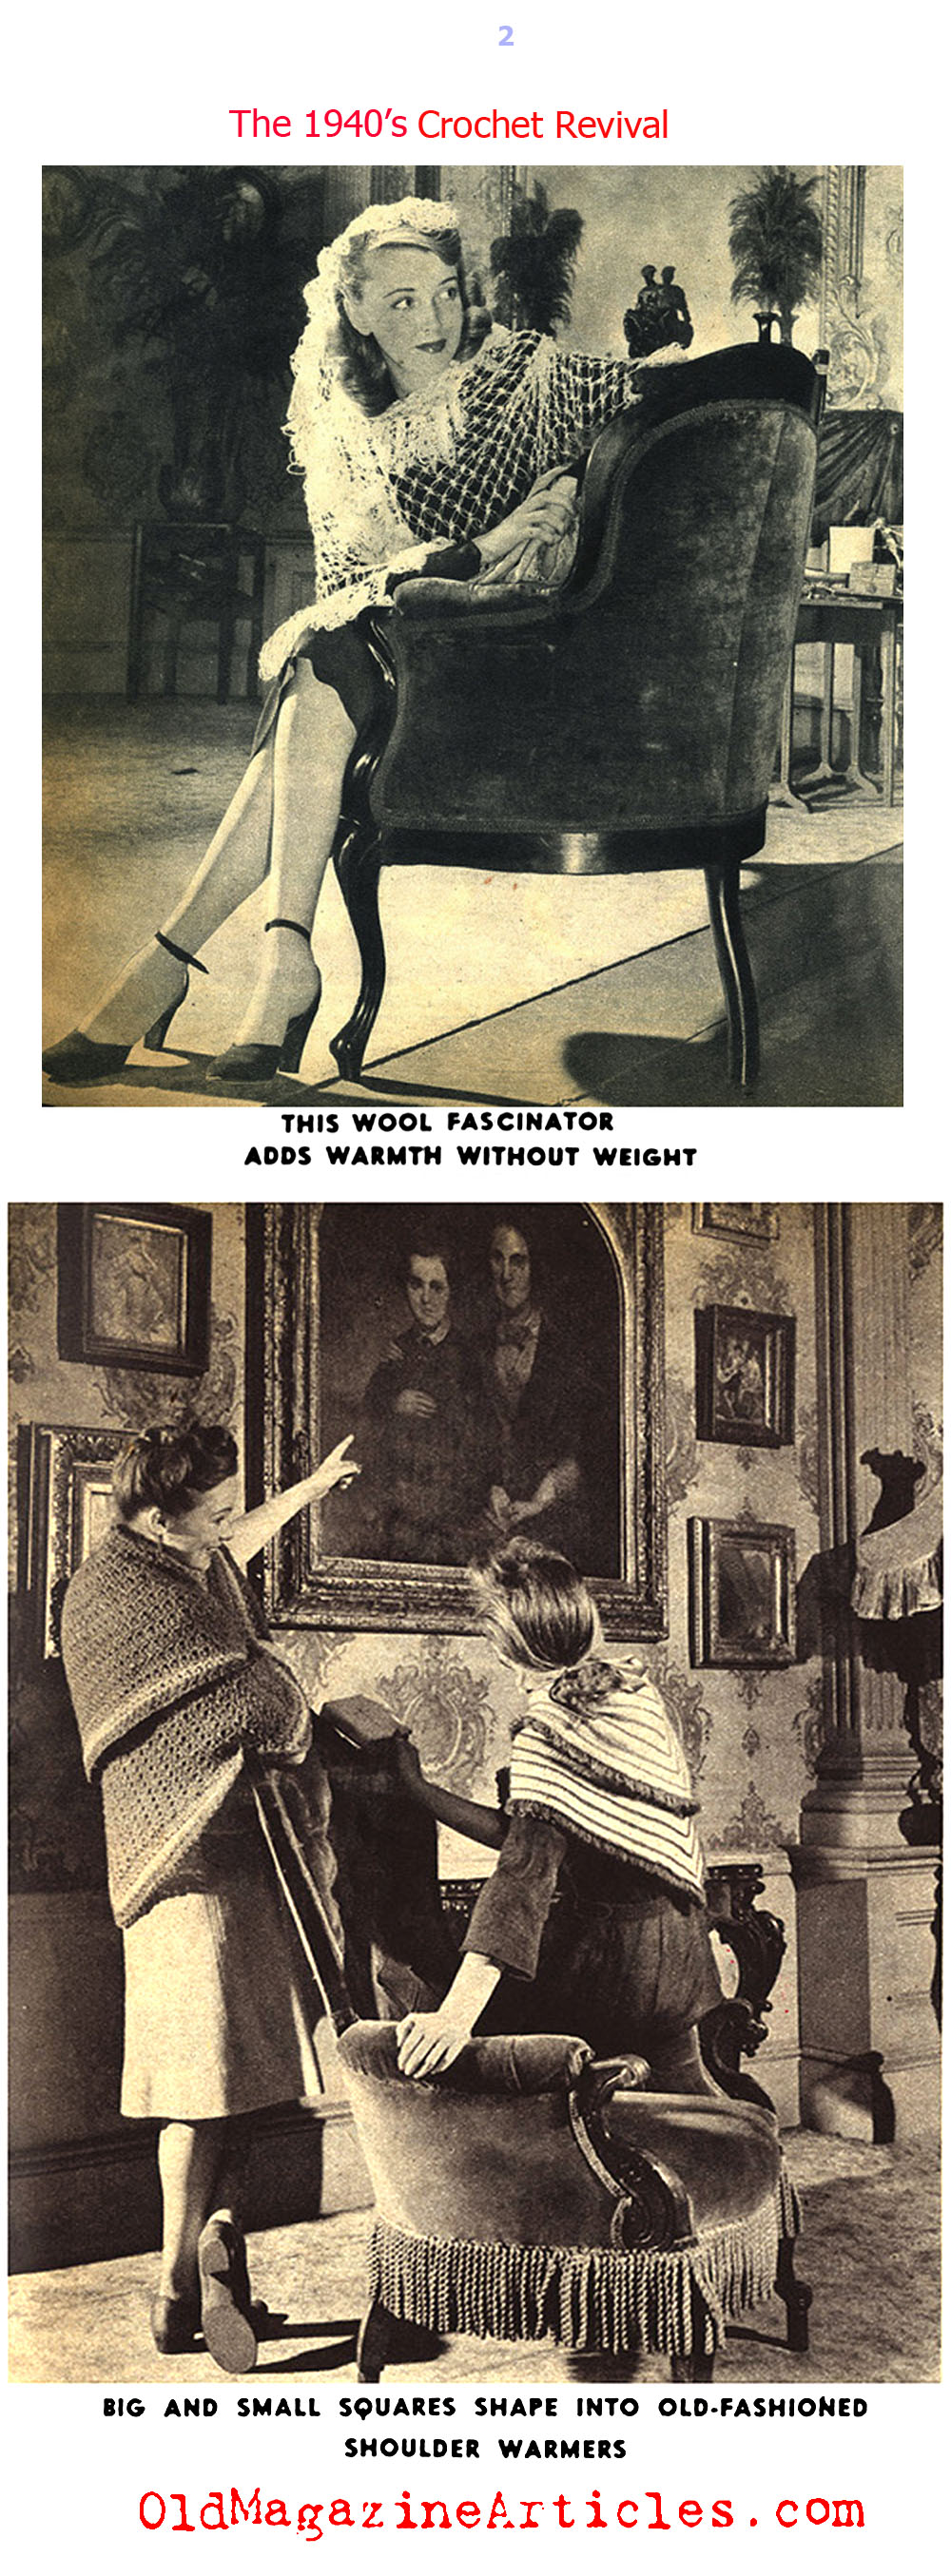 Crochet Made a Come-Back on the W.W. II Fashion Front (Click Magazine, 1943)